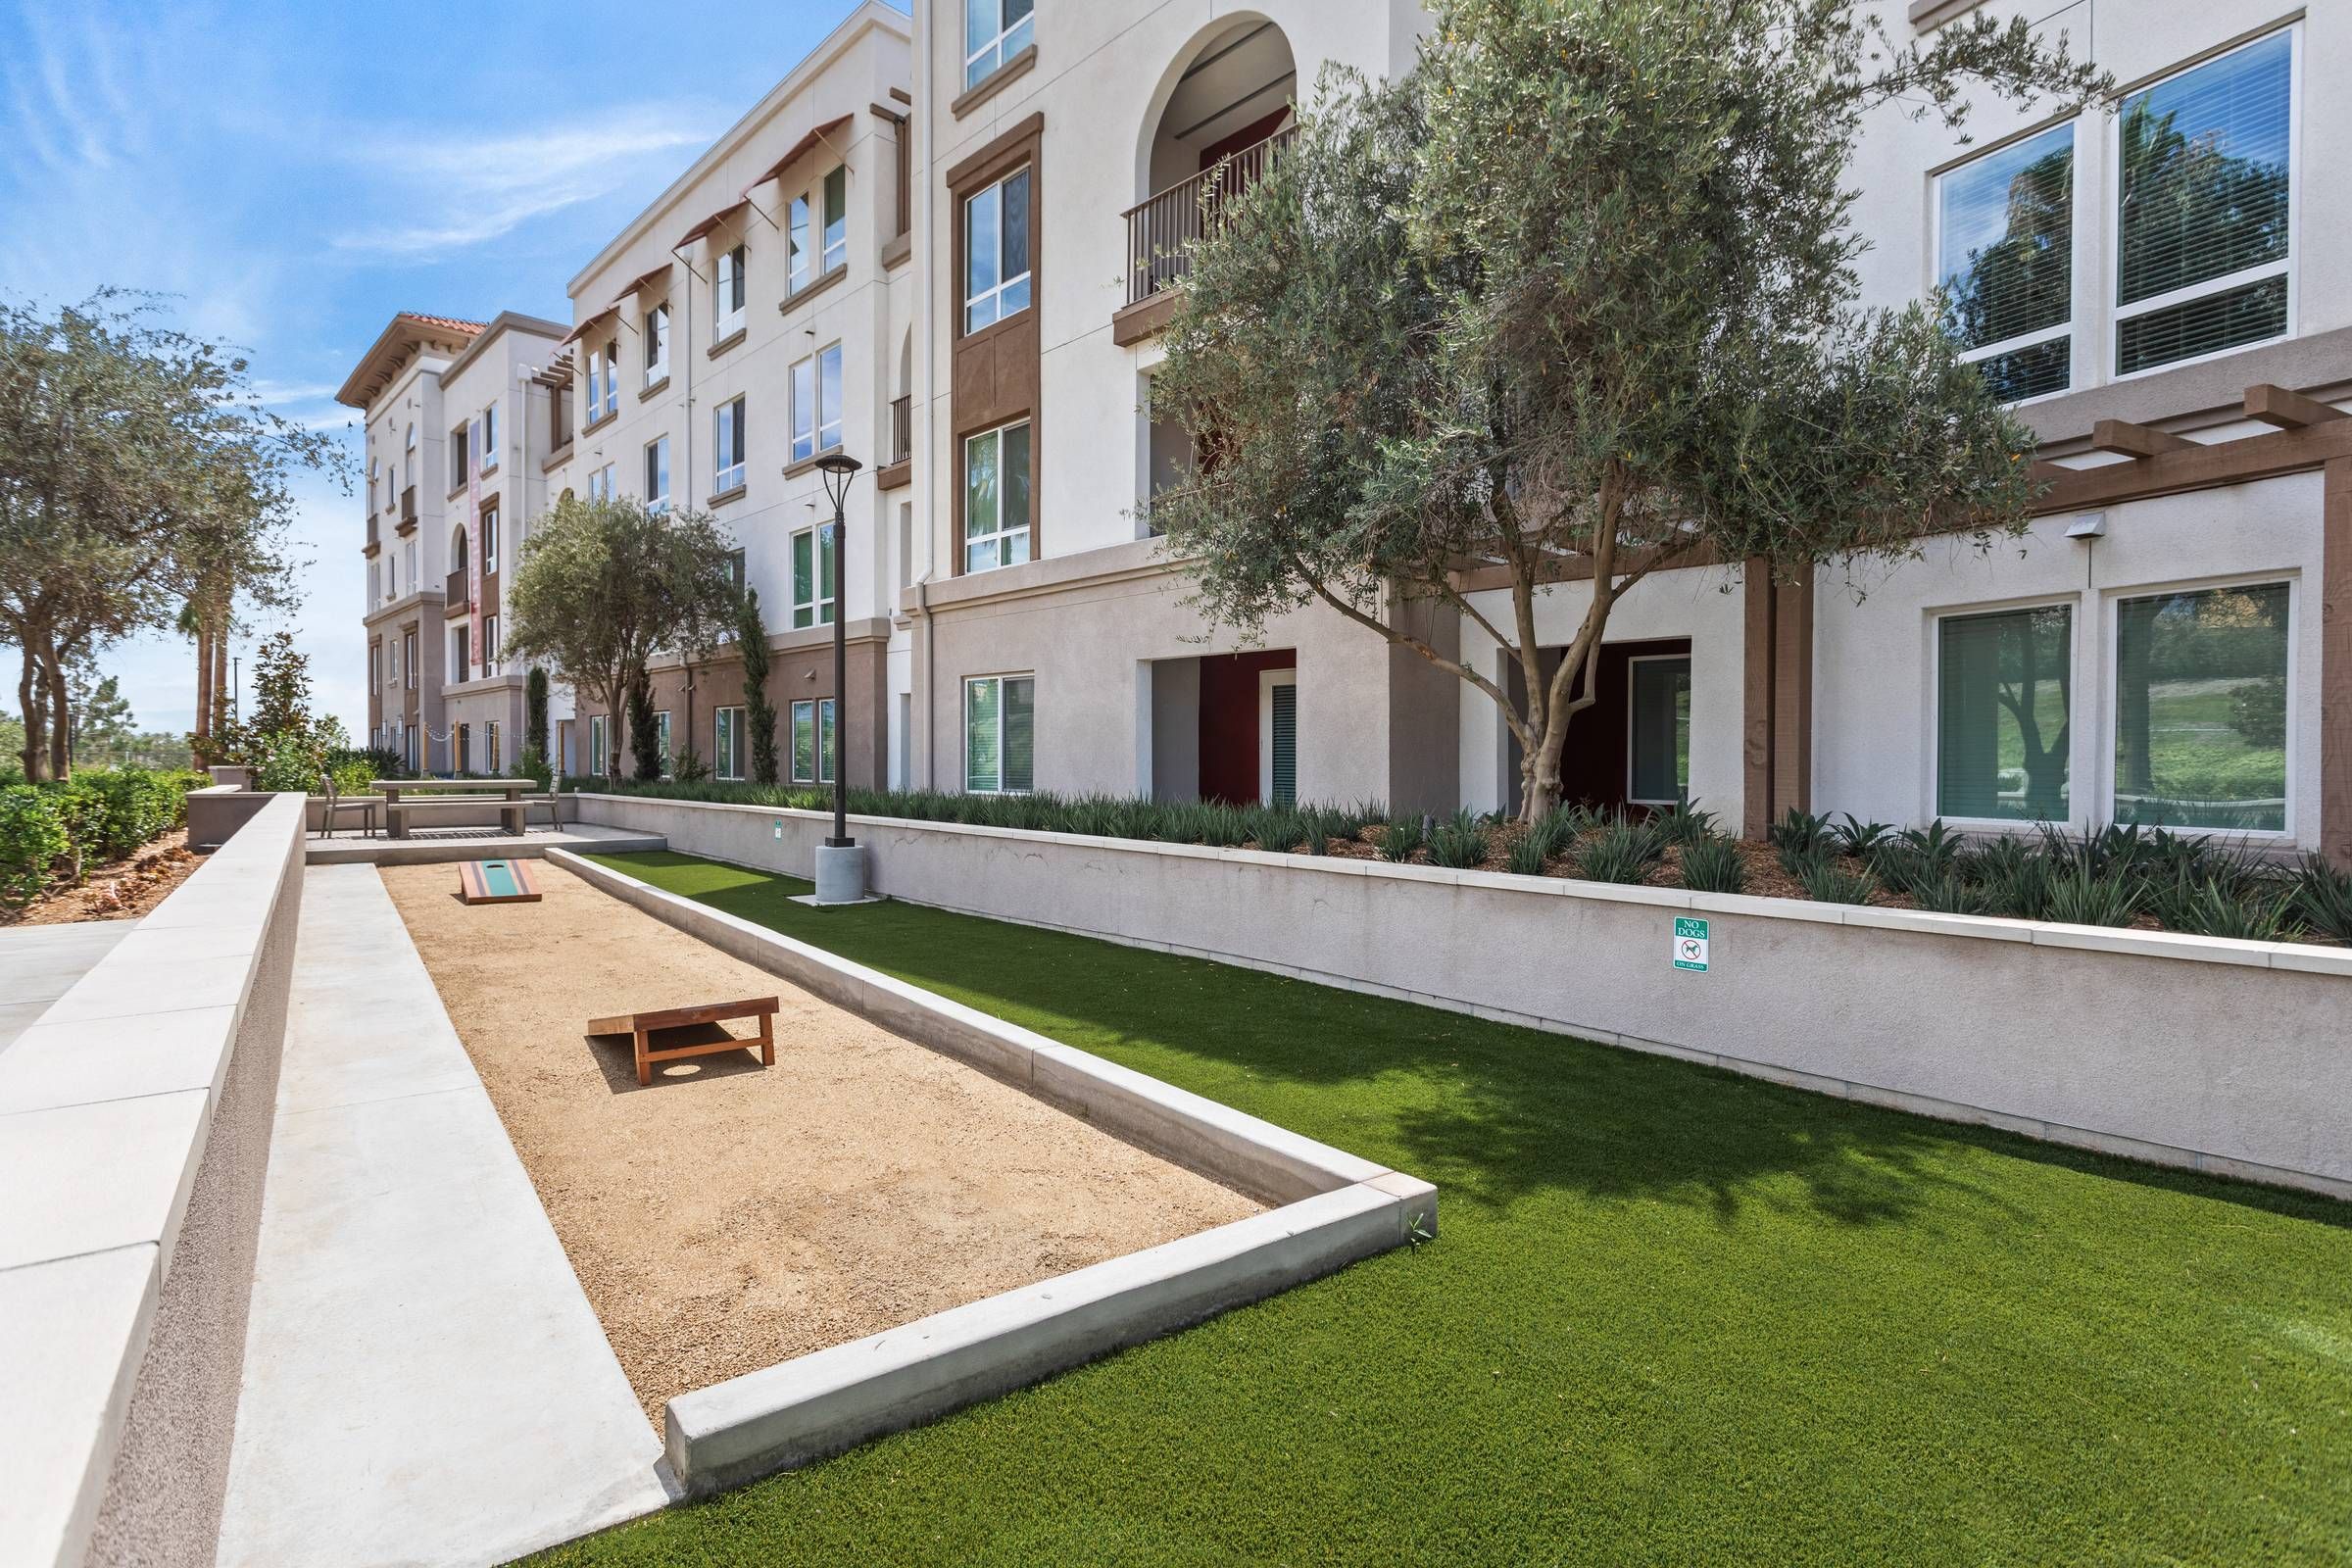 A serene bocce ball court at Alta Upland lies adjacent to a landscaped walkway with neatly trimmed hedges and apartment windows overlooking the area.